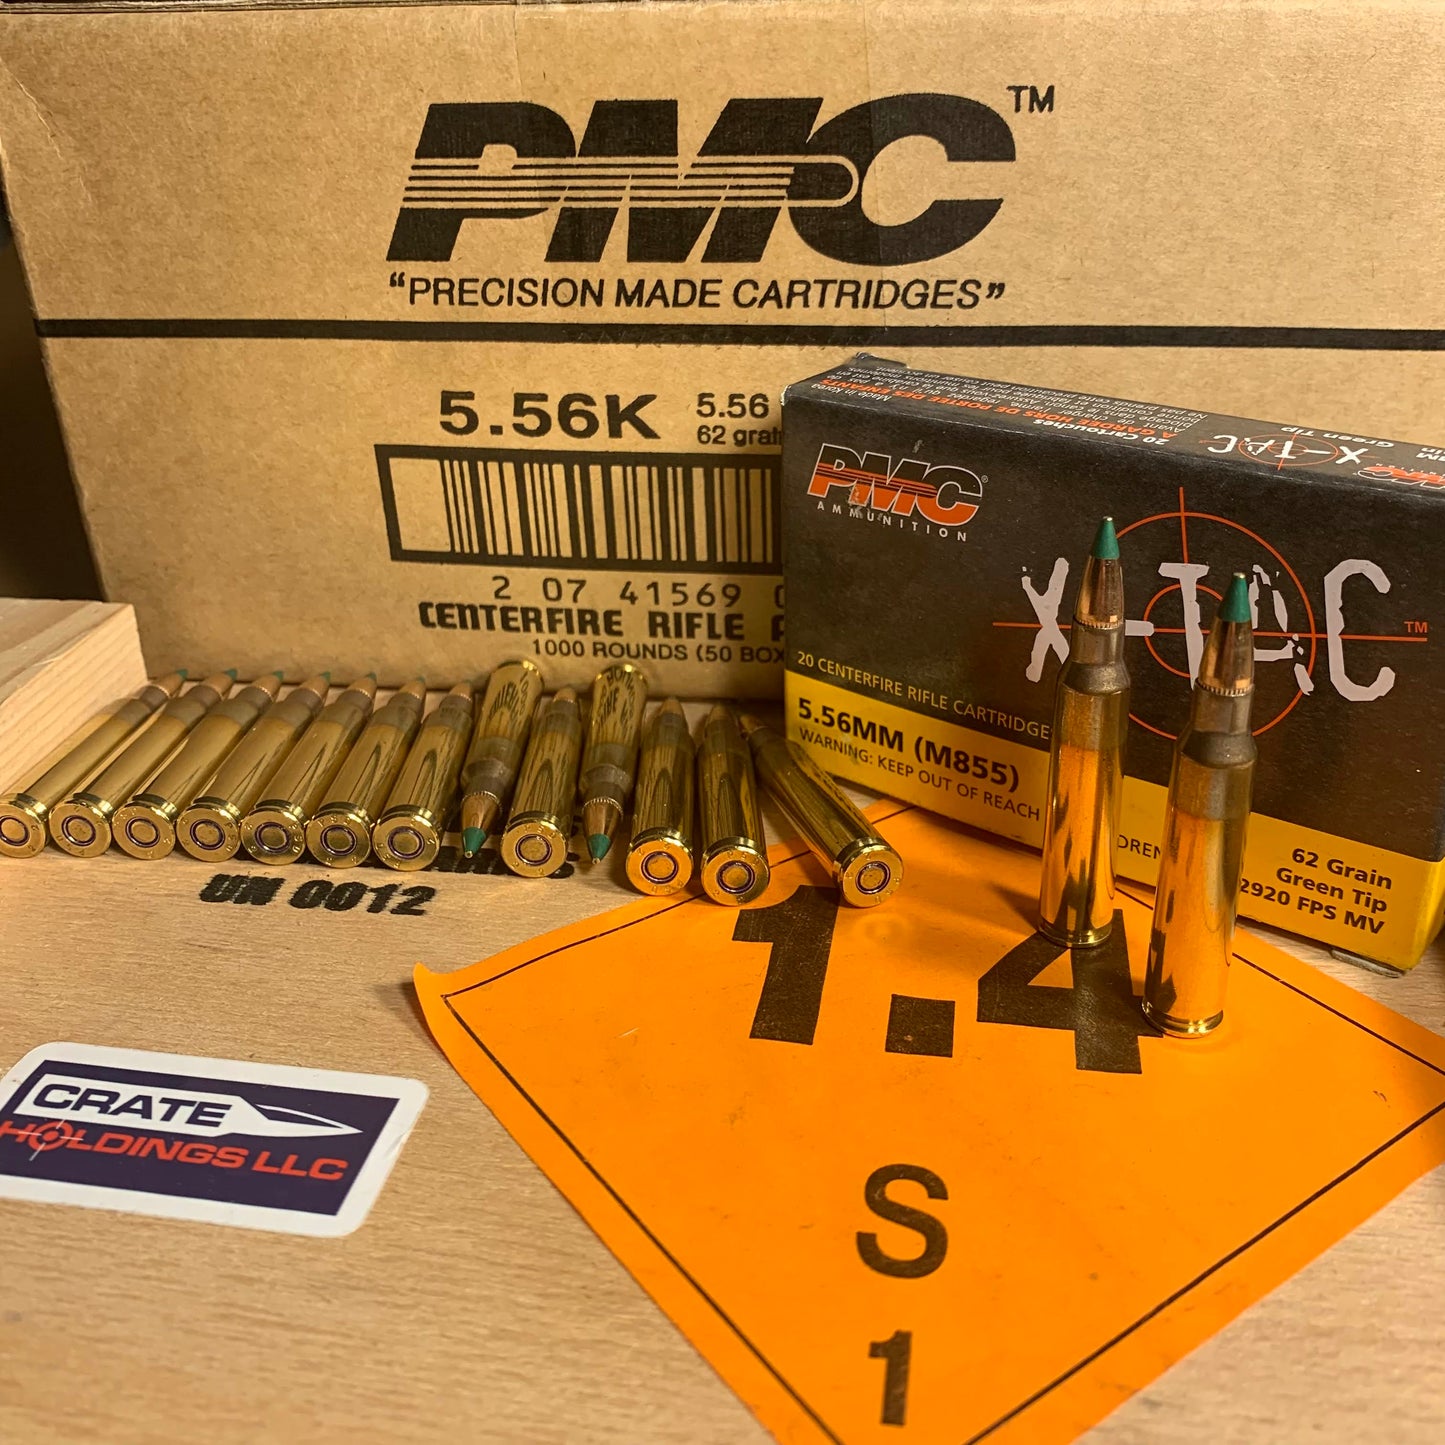 1000 Rounds M855 PMC X-TAC 62gr Green Tip LAP 5.56 NATO Ammo- 5.56K